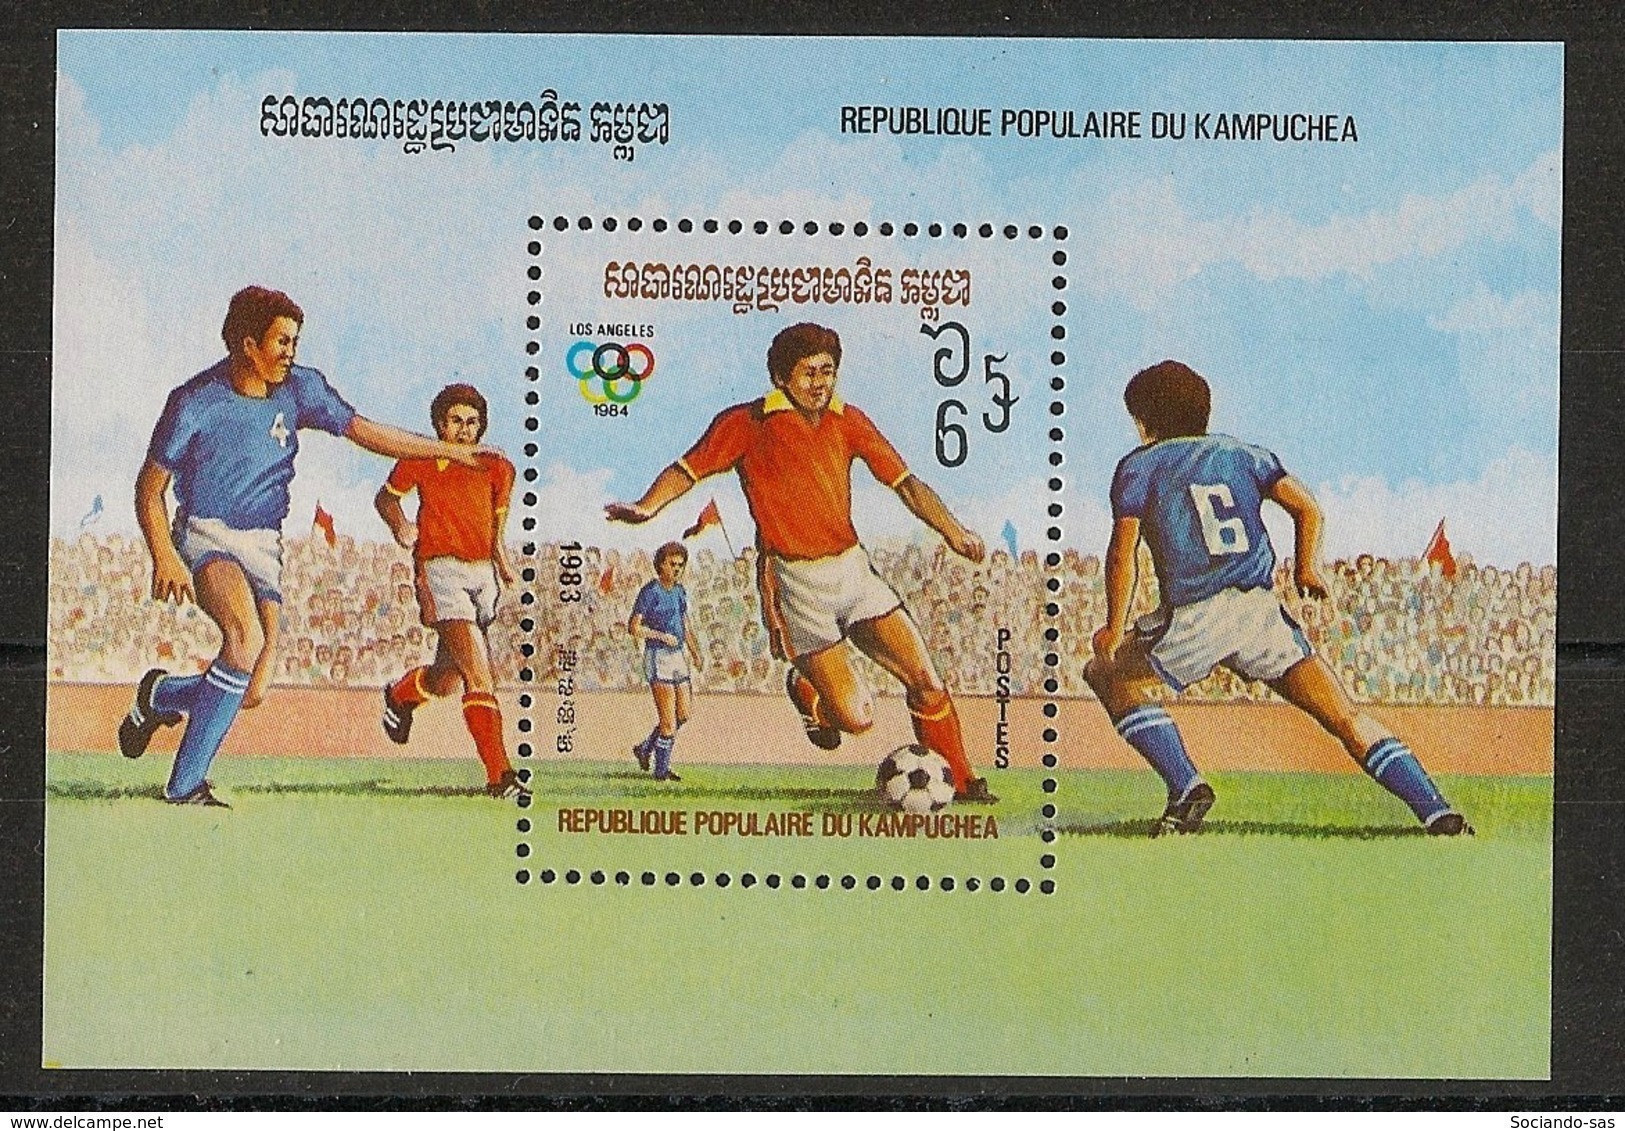 KAMPUCHEA - 1983 - Bloc Feuillet BF N°Yv. 35 - Olympics / Los Angeles 1984 - Neuf Luxe ** / MNH / Postfrisch - Kampuchea